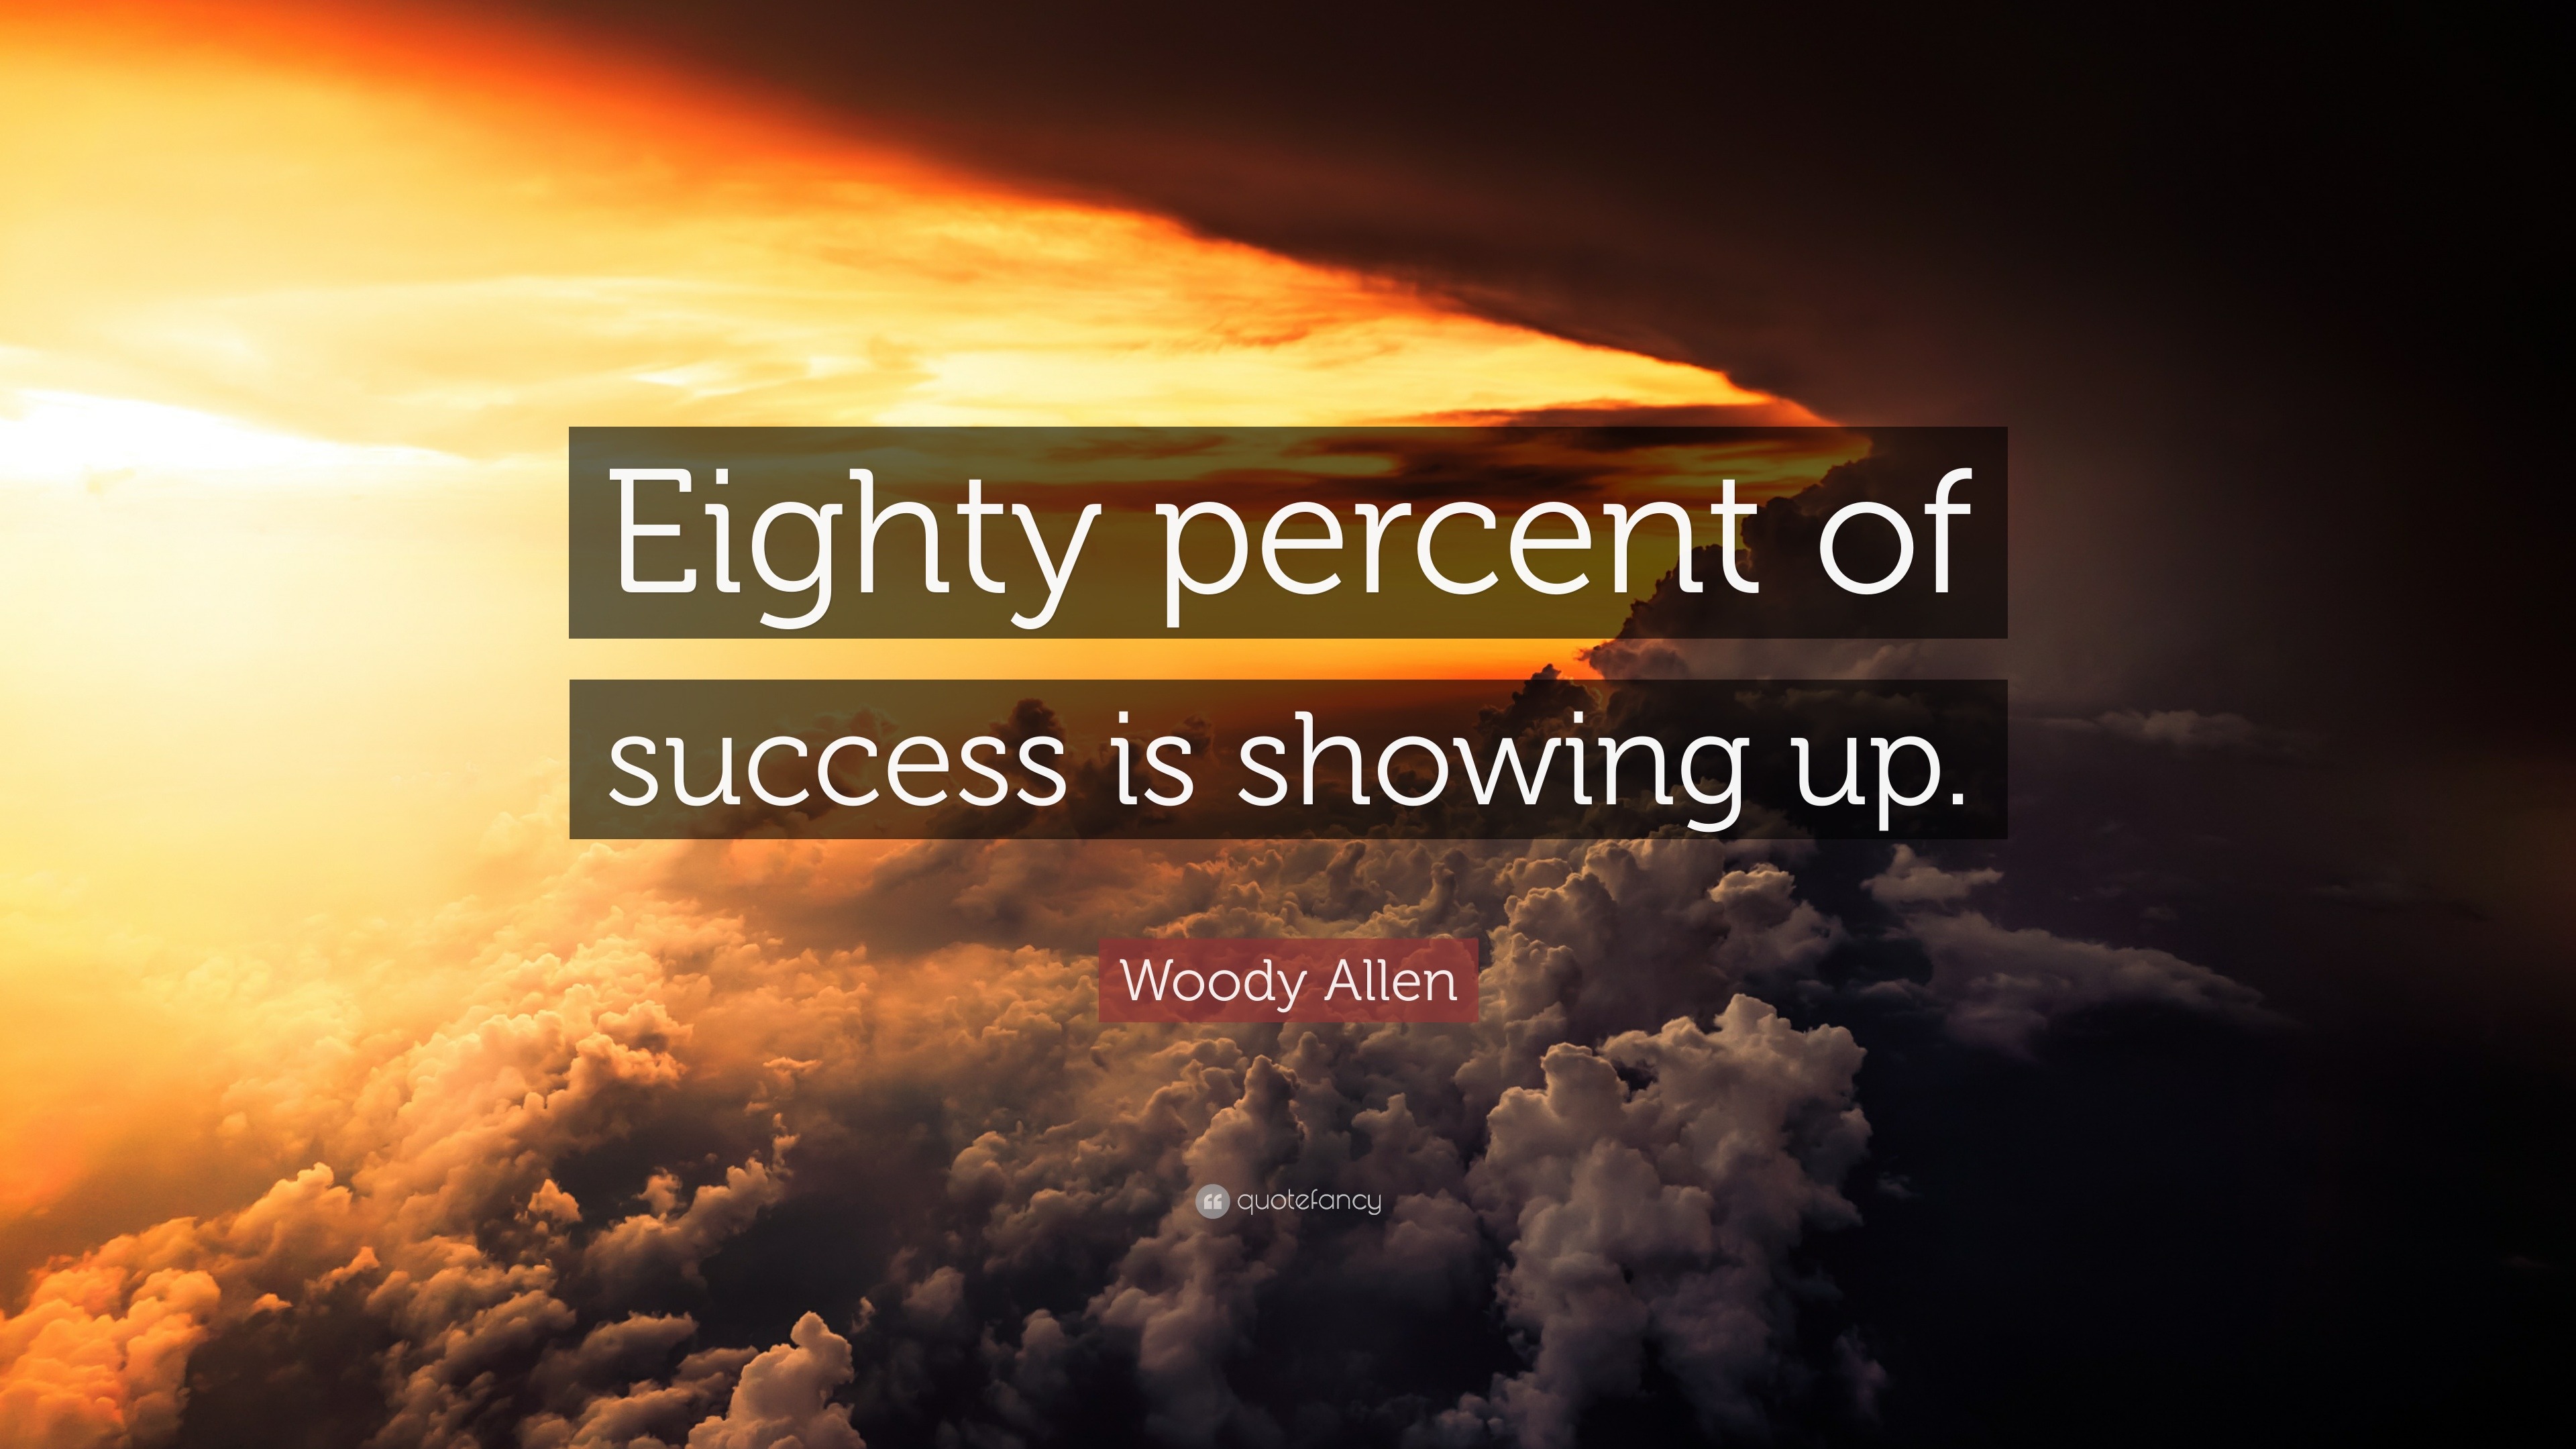 Woody Allen Quote “eighty Percent Of Success Is Showing Up” 23 Wallpapers Quotefancy 6512